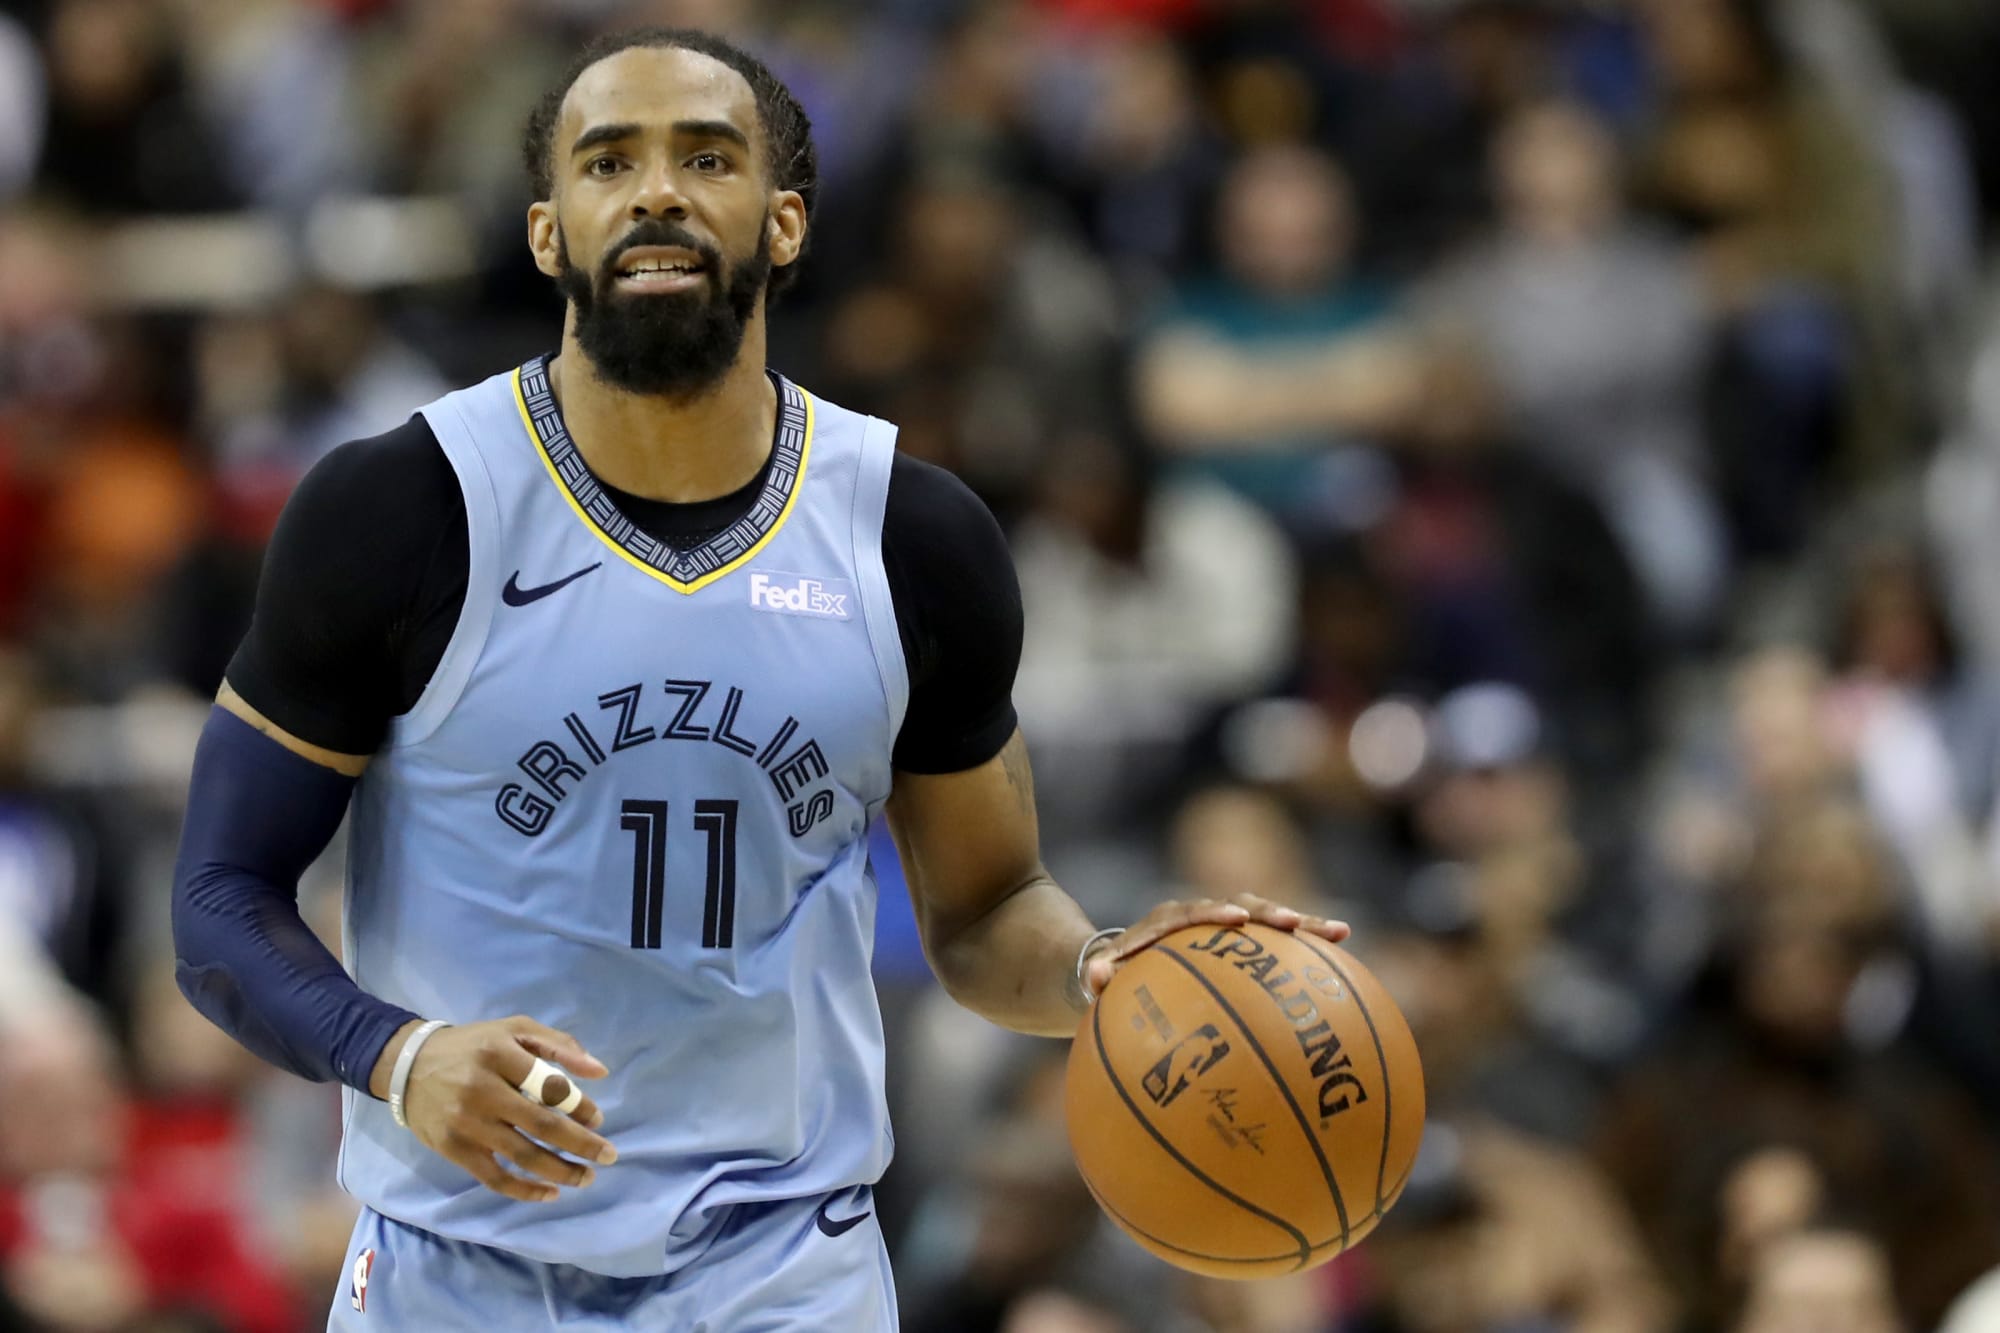 Ohio State Basketball Mike Conley continues to impress